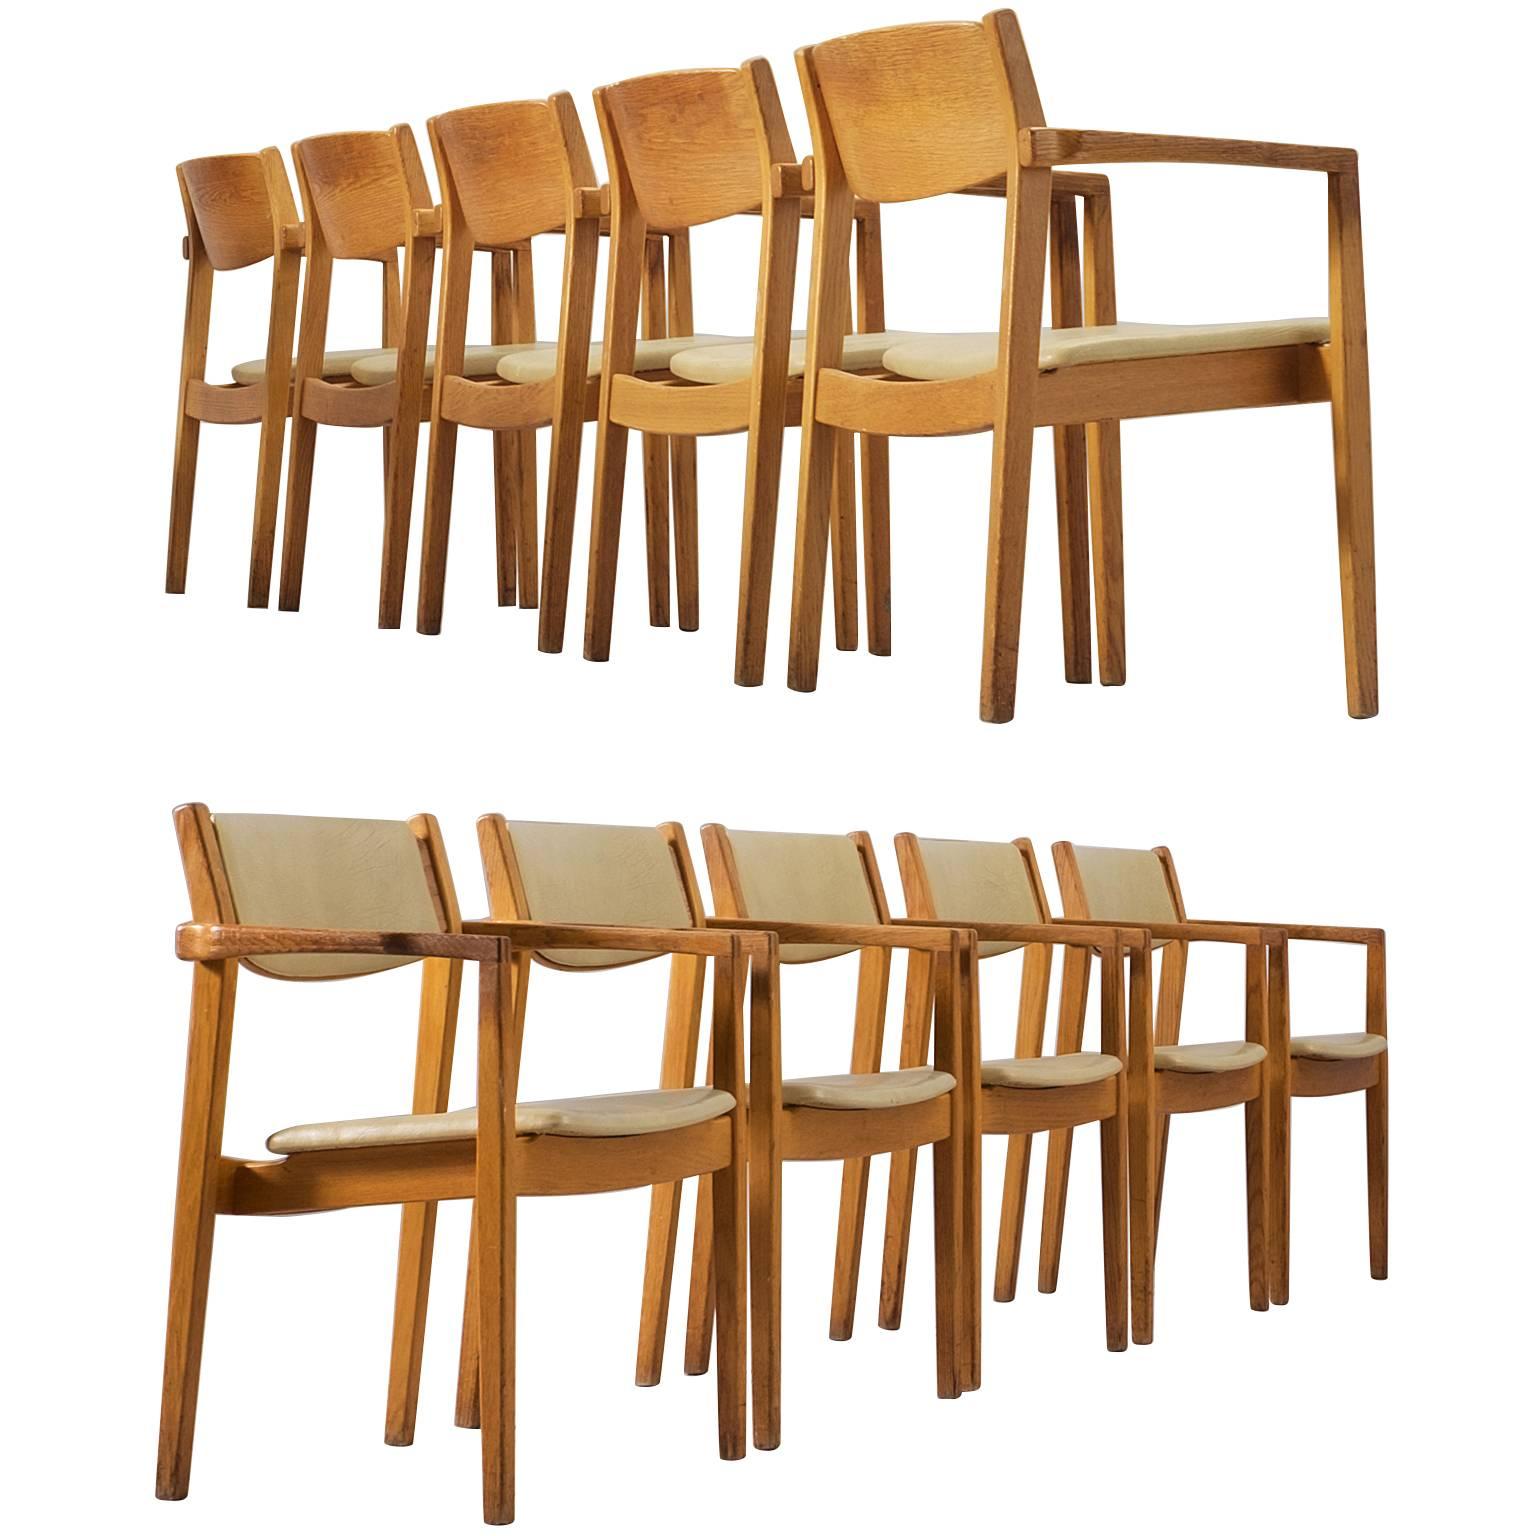 Set of Ten Dining Room Chairs in Solid Oak 